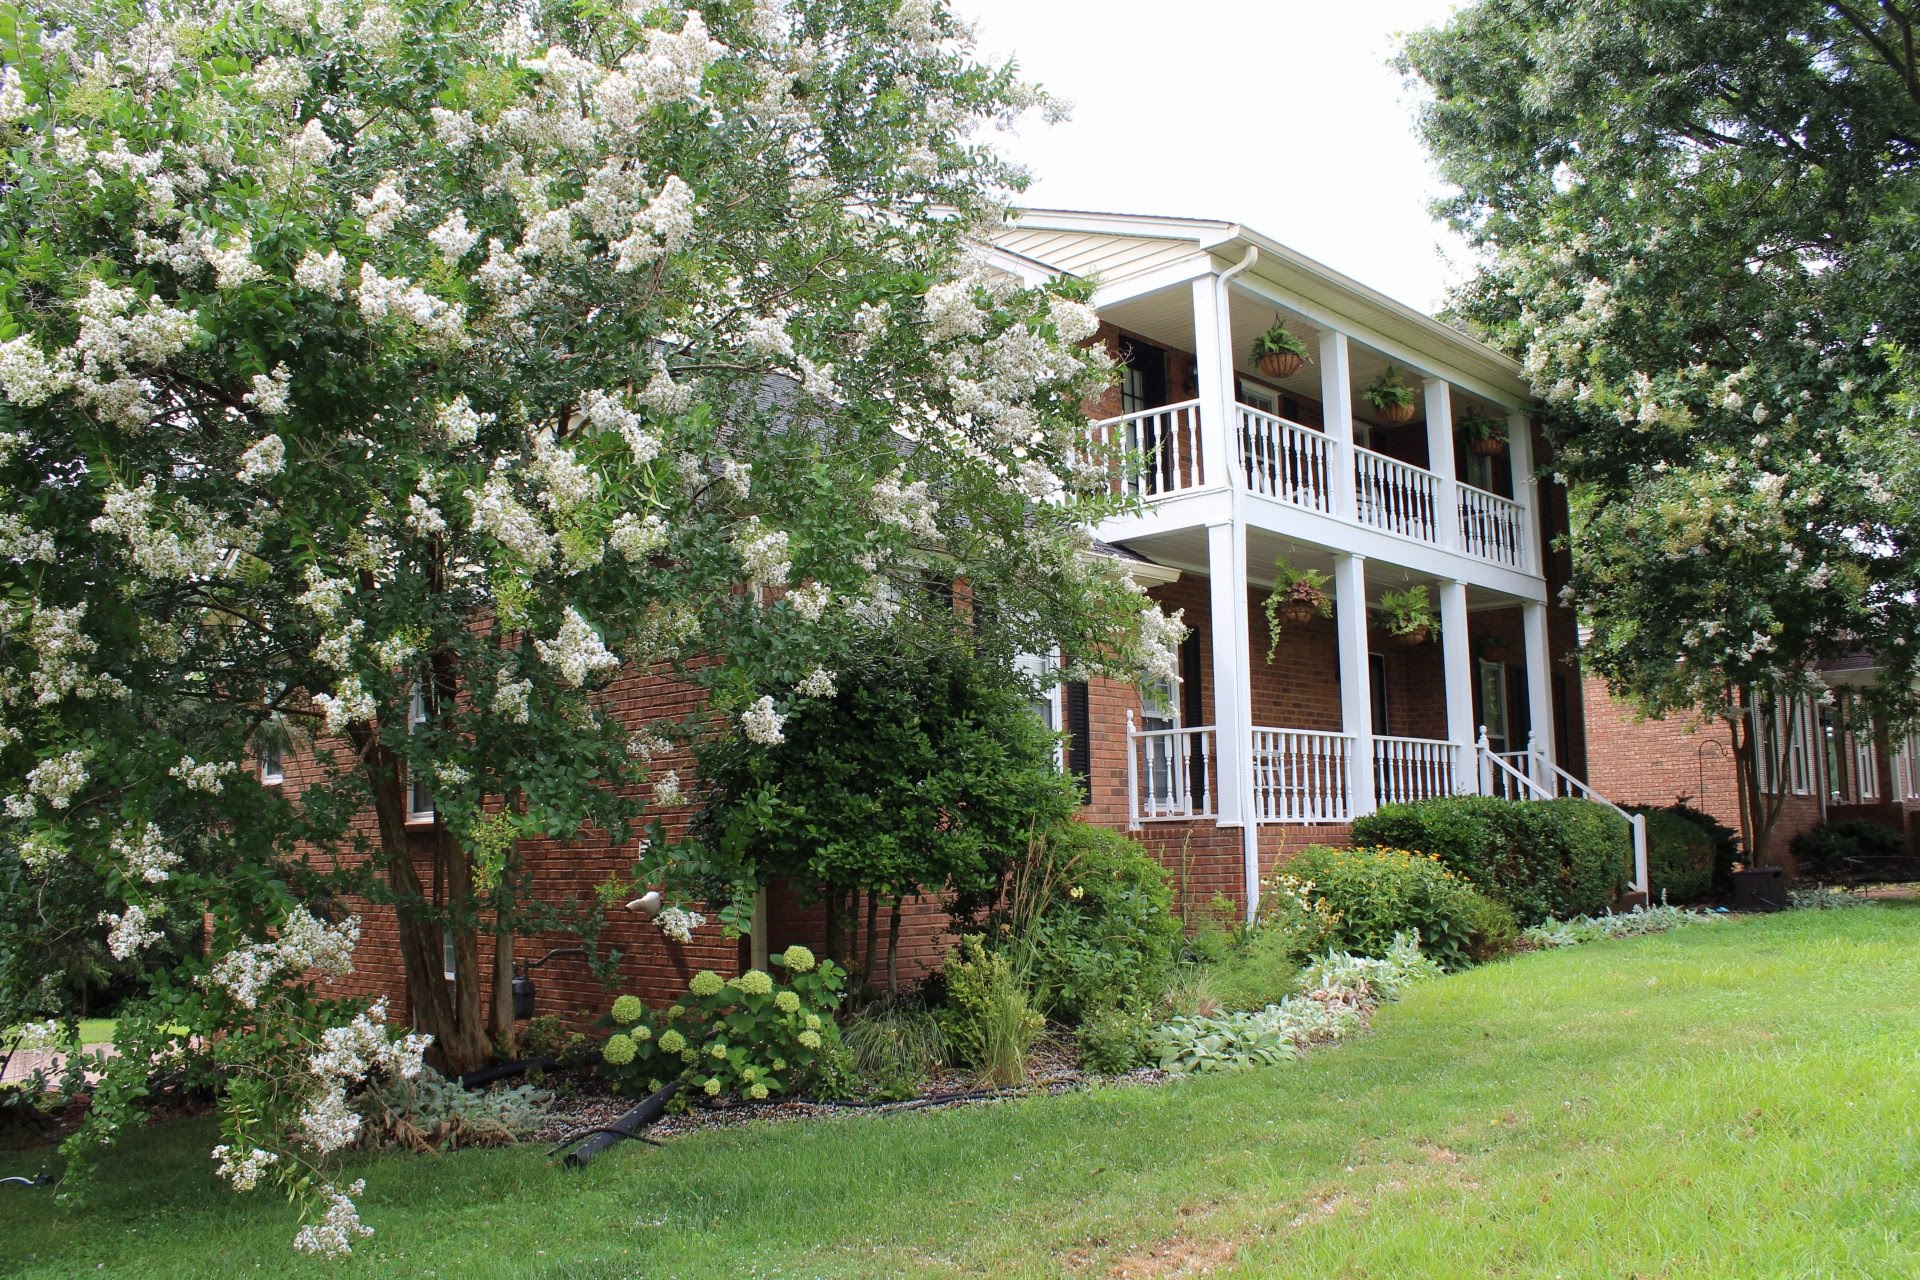 View of front of house with white crape myrtle trees